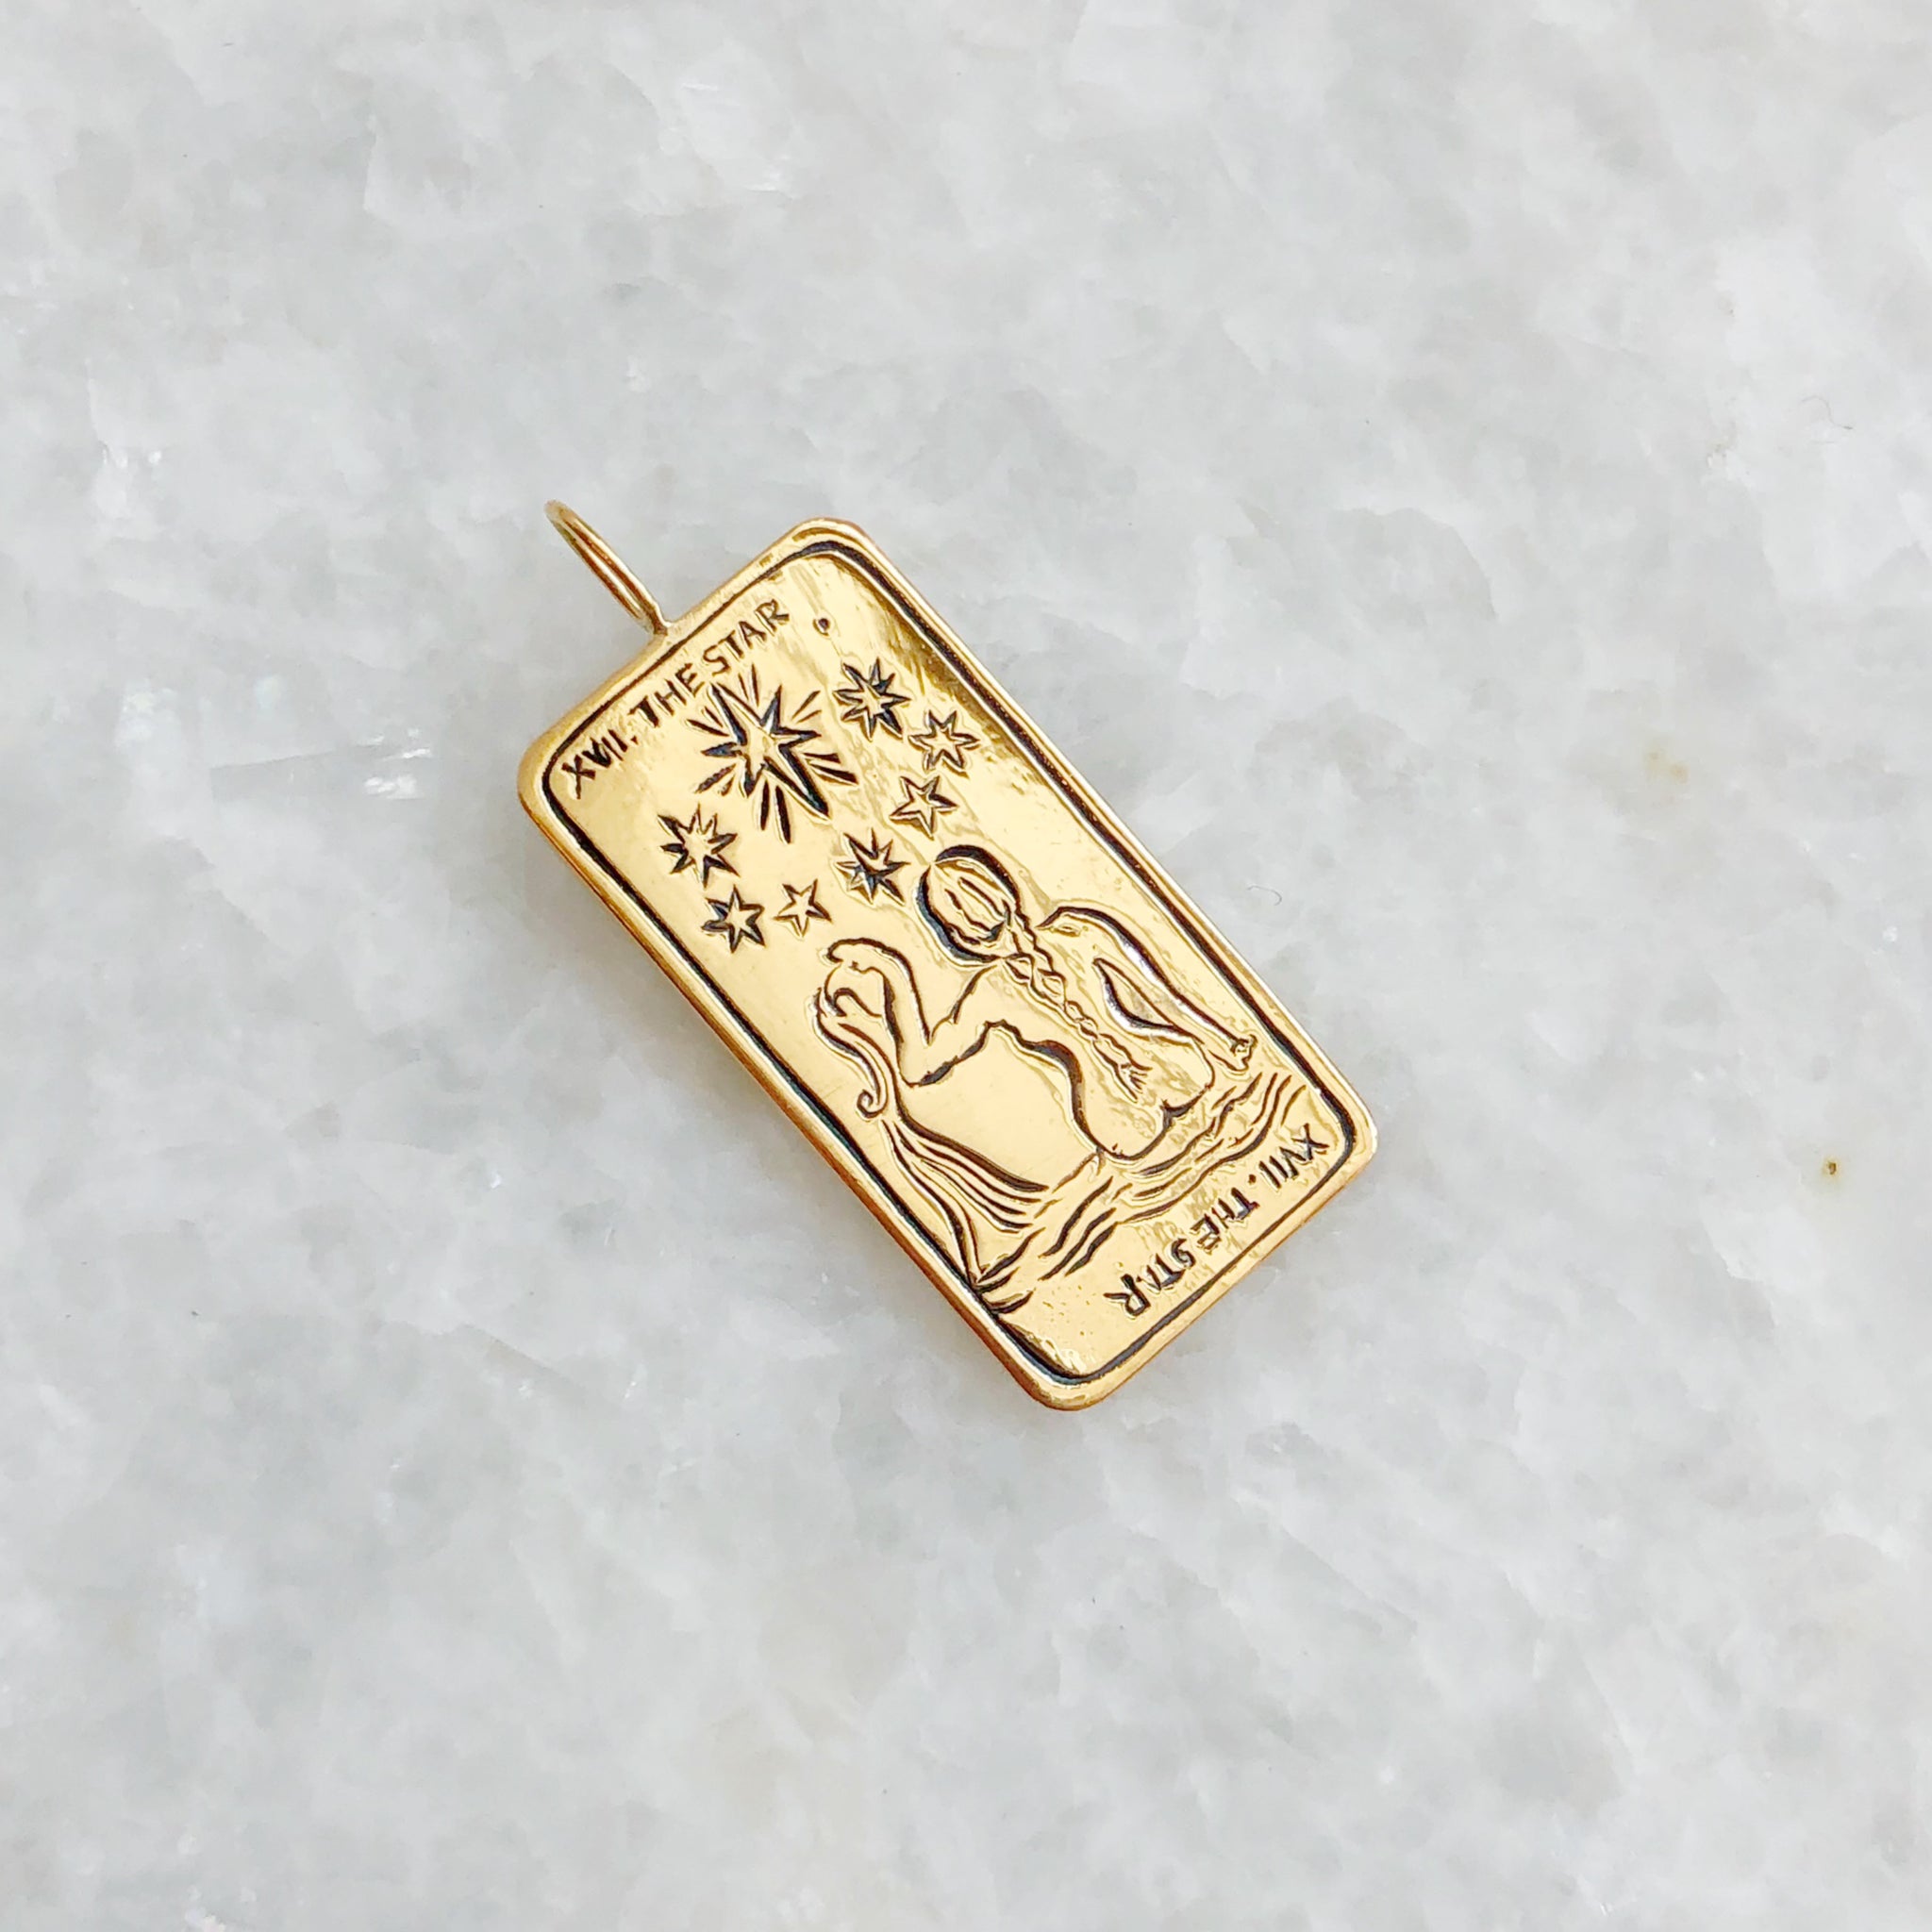 Buy Wheel of Fortune Gold Tarot Card Necklace Best Friend Birthday Gift  Wheel of Fortune Tarot Card Celestial Mystic Witch Necklace Online in India  - Etsy